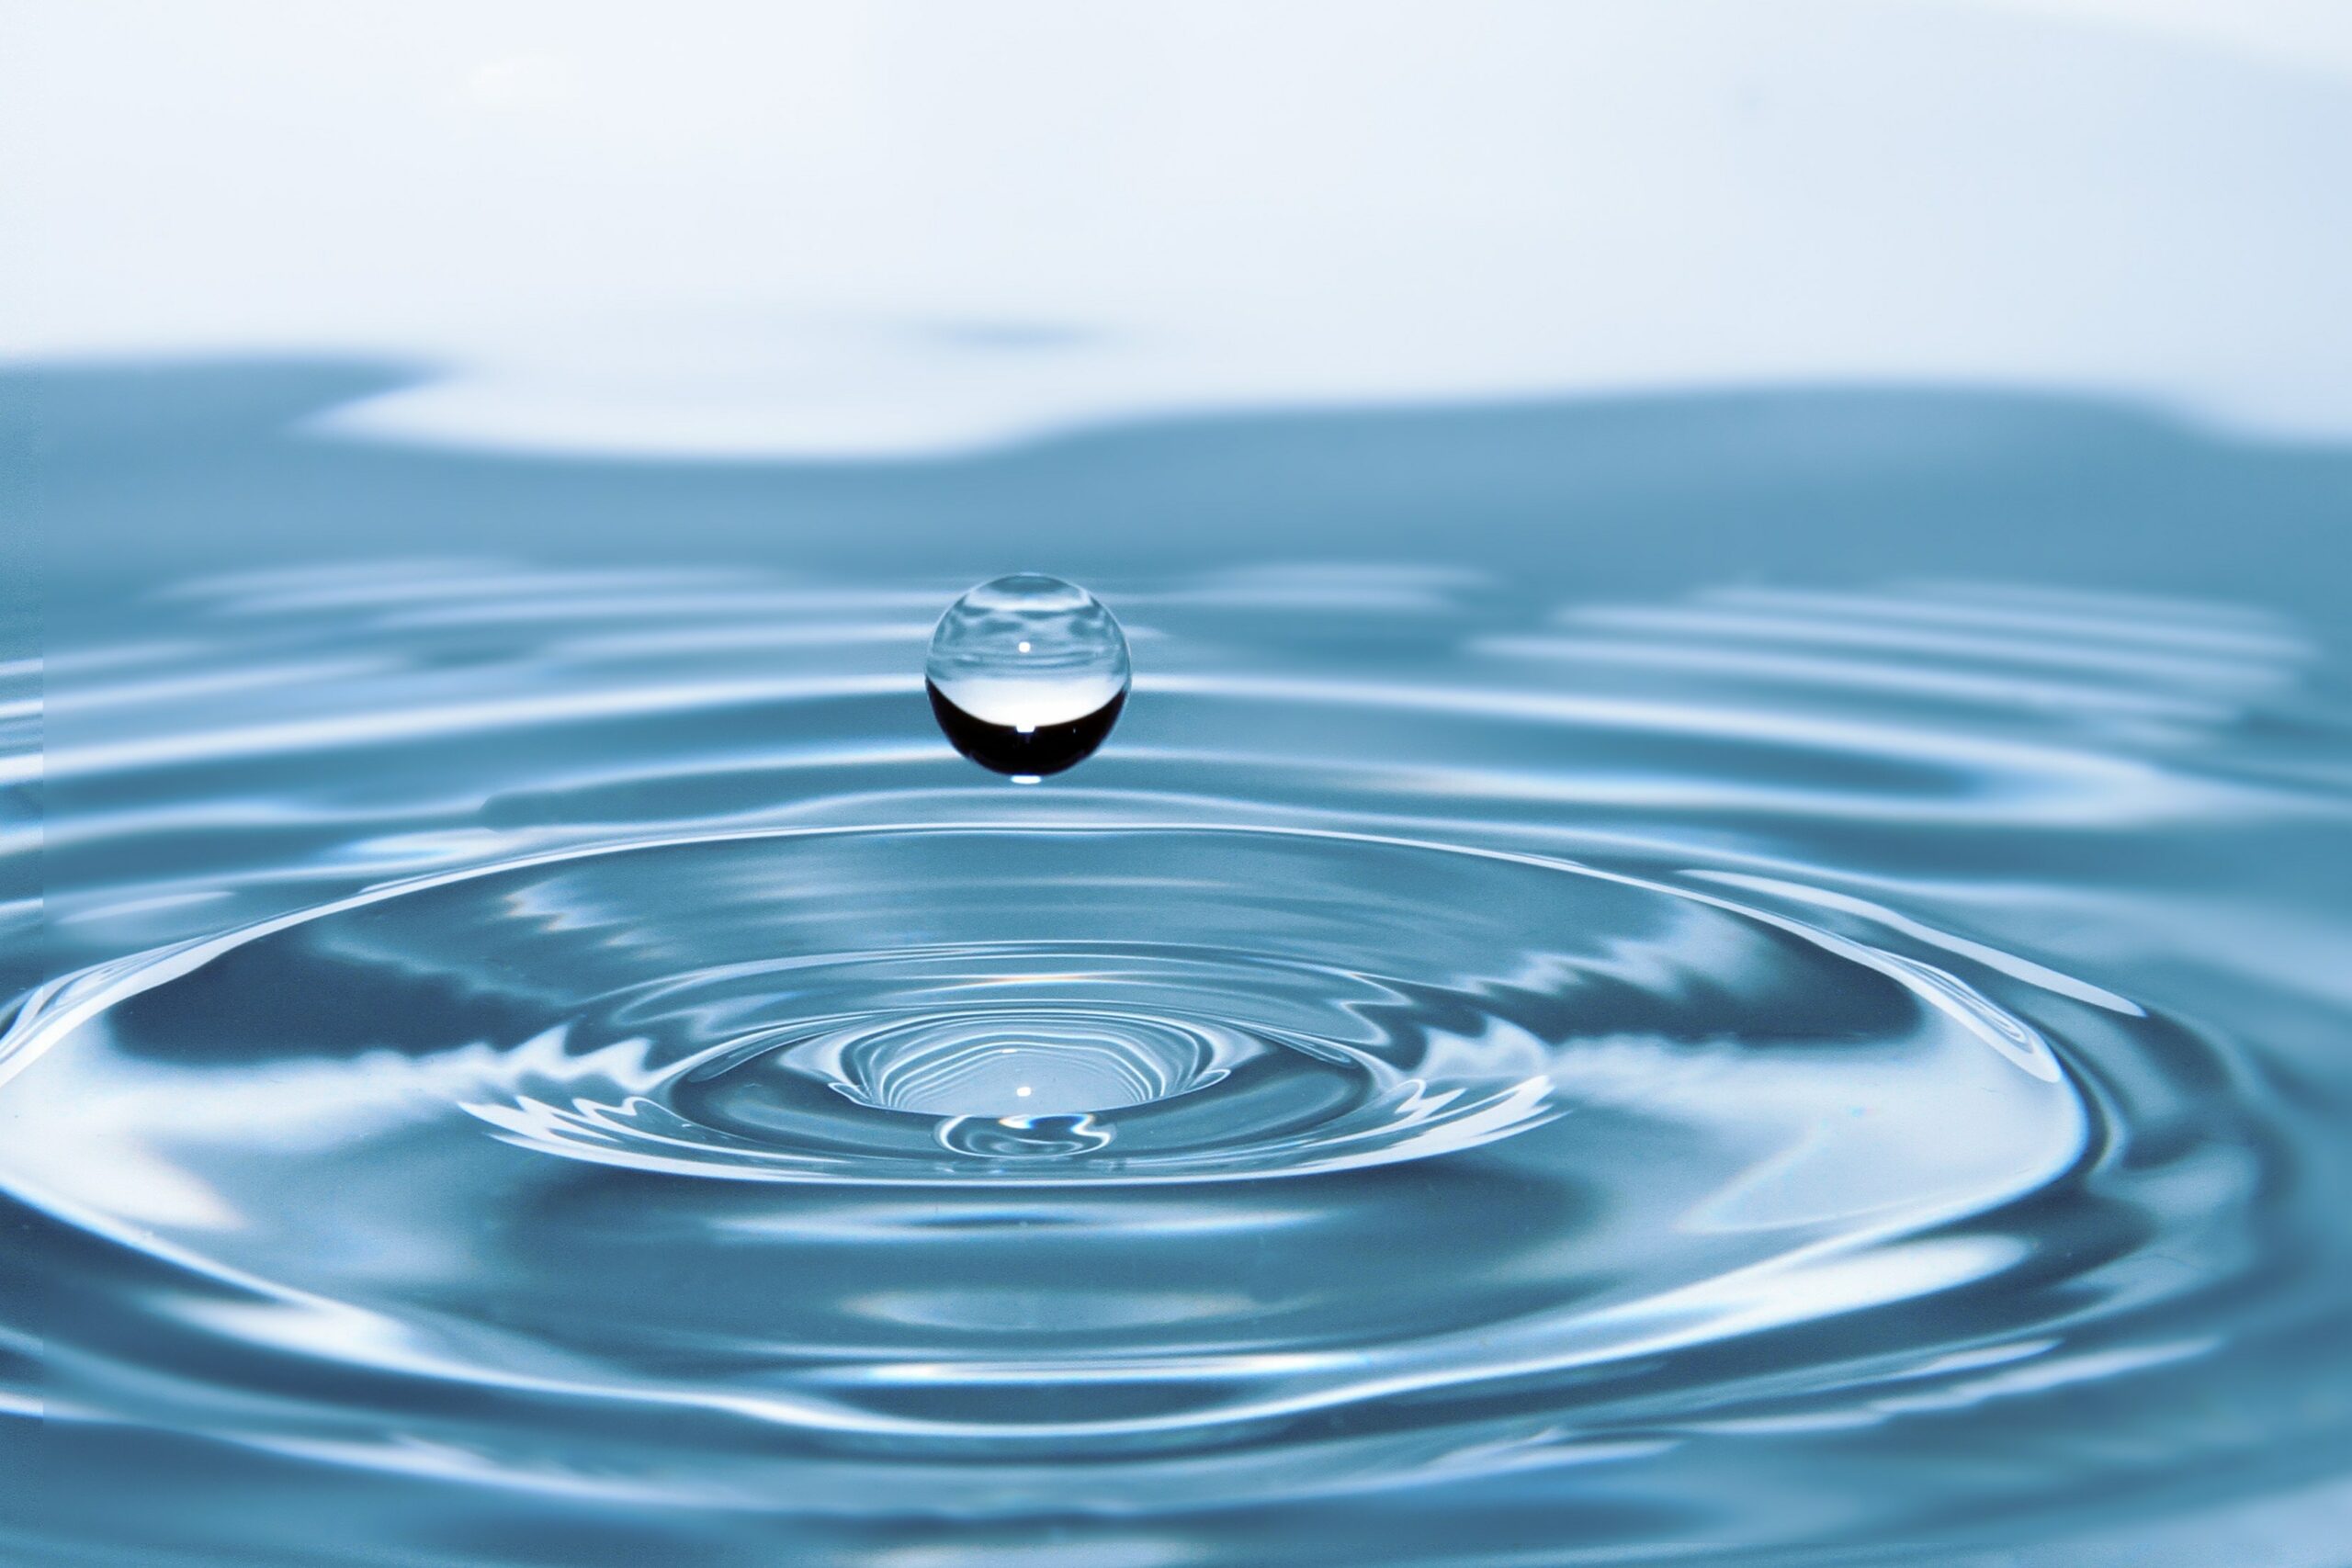 York University and UNITAR tackle global water challenges on UN World Water Day